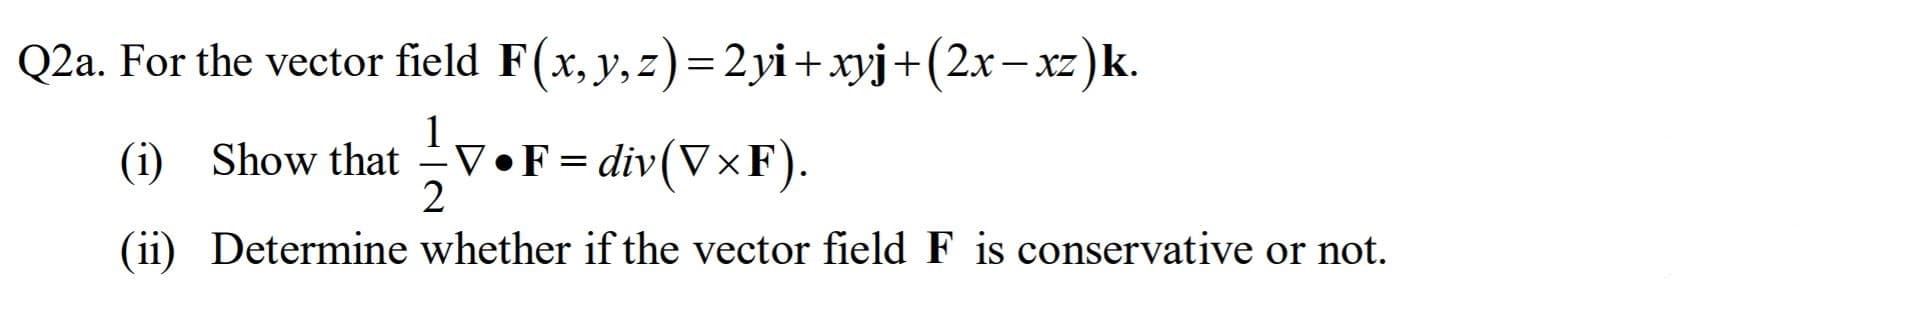 Q2a. For the vector field F(x, y, z)=2yi+xyj+(2x-xz)k.
XZ
(i) Show that
1
V•F = div(V×F).
(ii) Determine whether if the vector field F is conservative or not.
